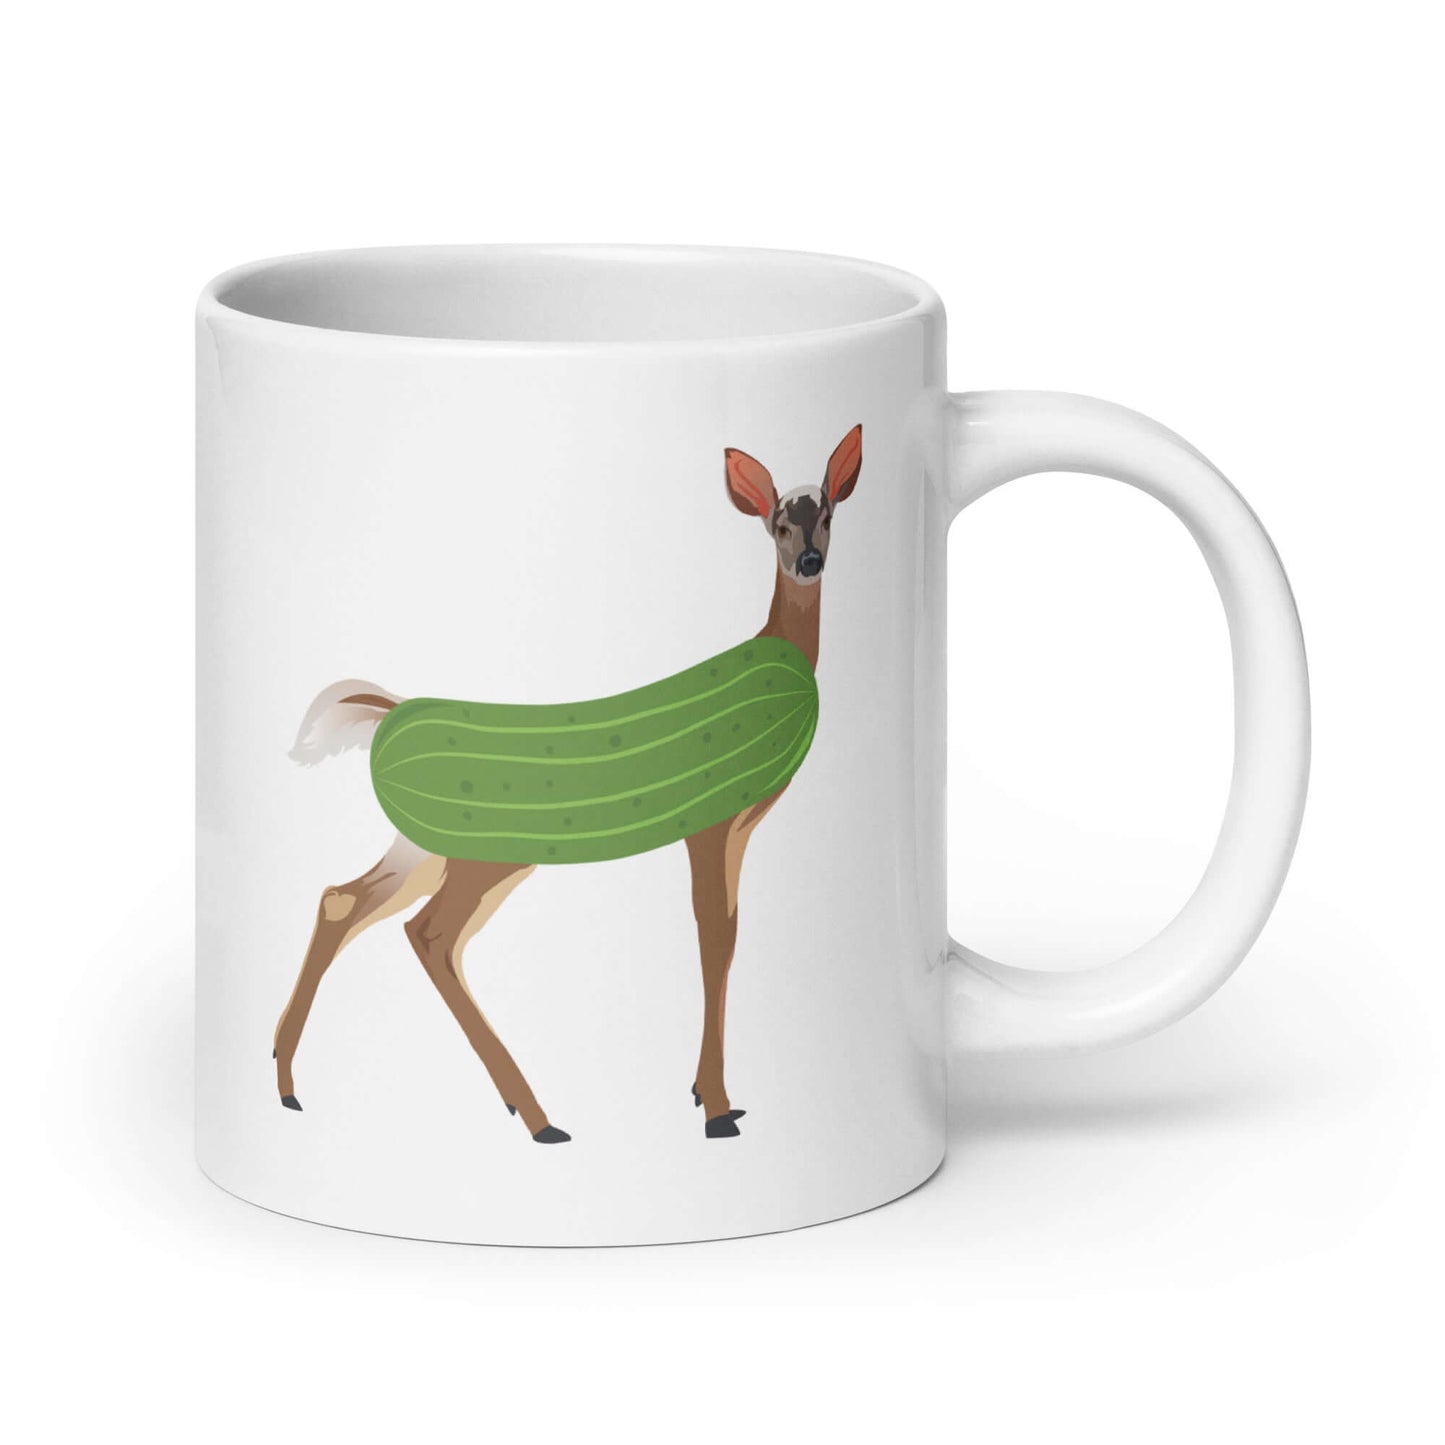 White ceramic dildo pun coffee mug with funny image of a doe deer with a dill pickle body printed on both sides of the mug.